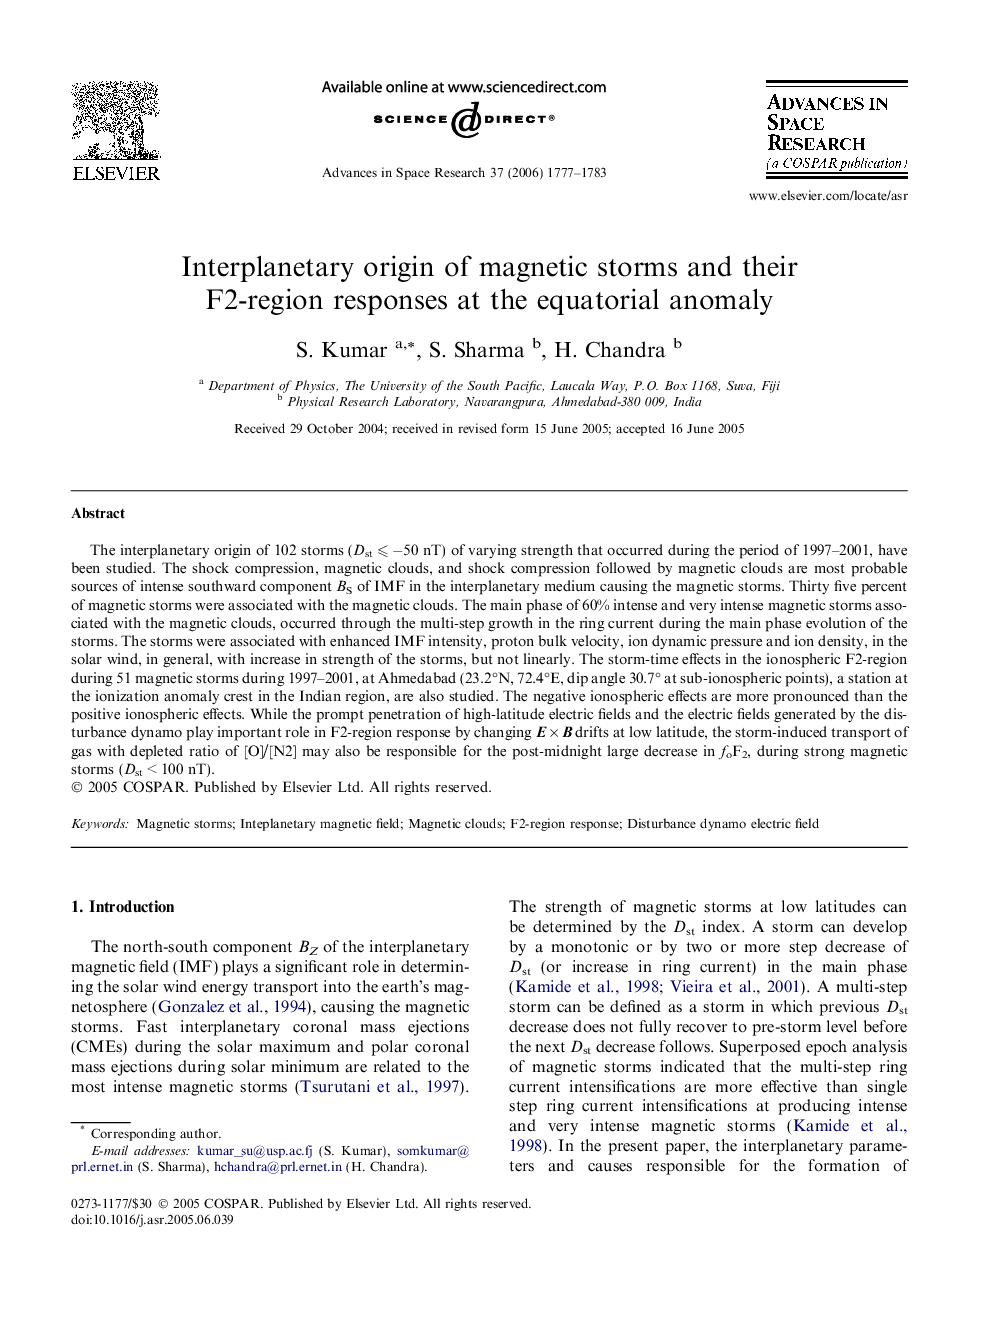 Interplanetary origin of magnetic storms and their F2-region responses at the equatorial anomaly